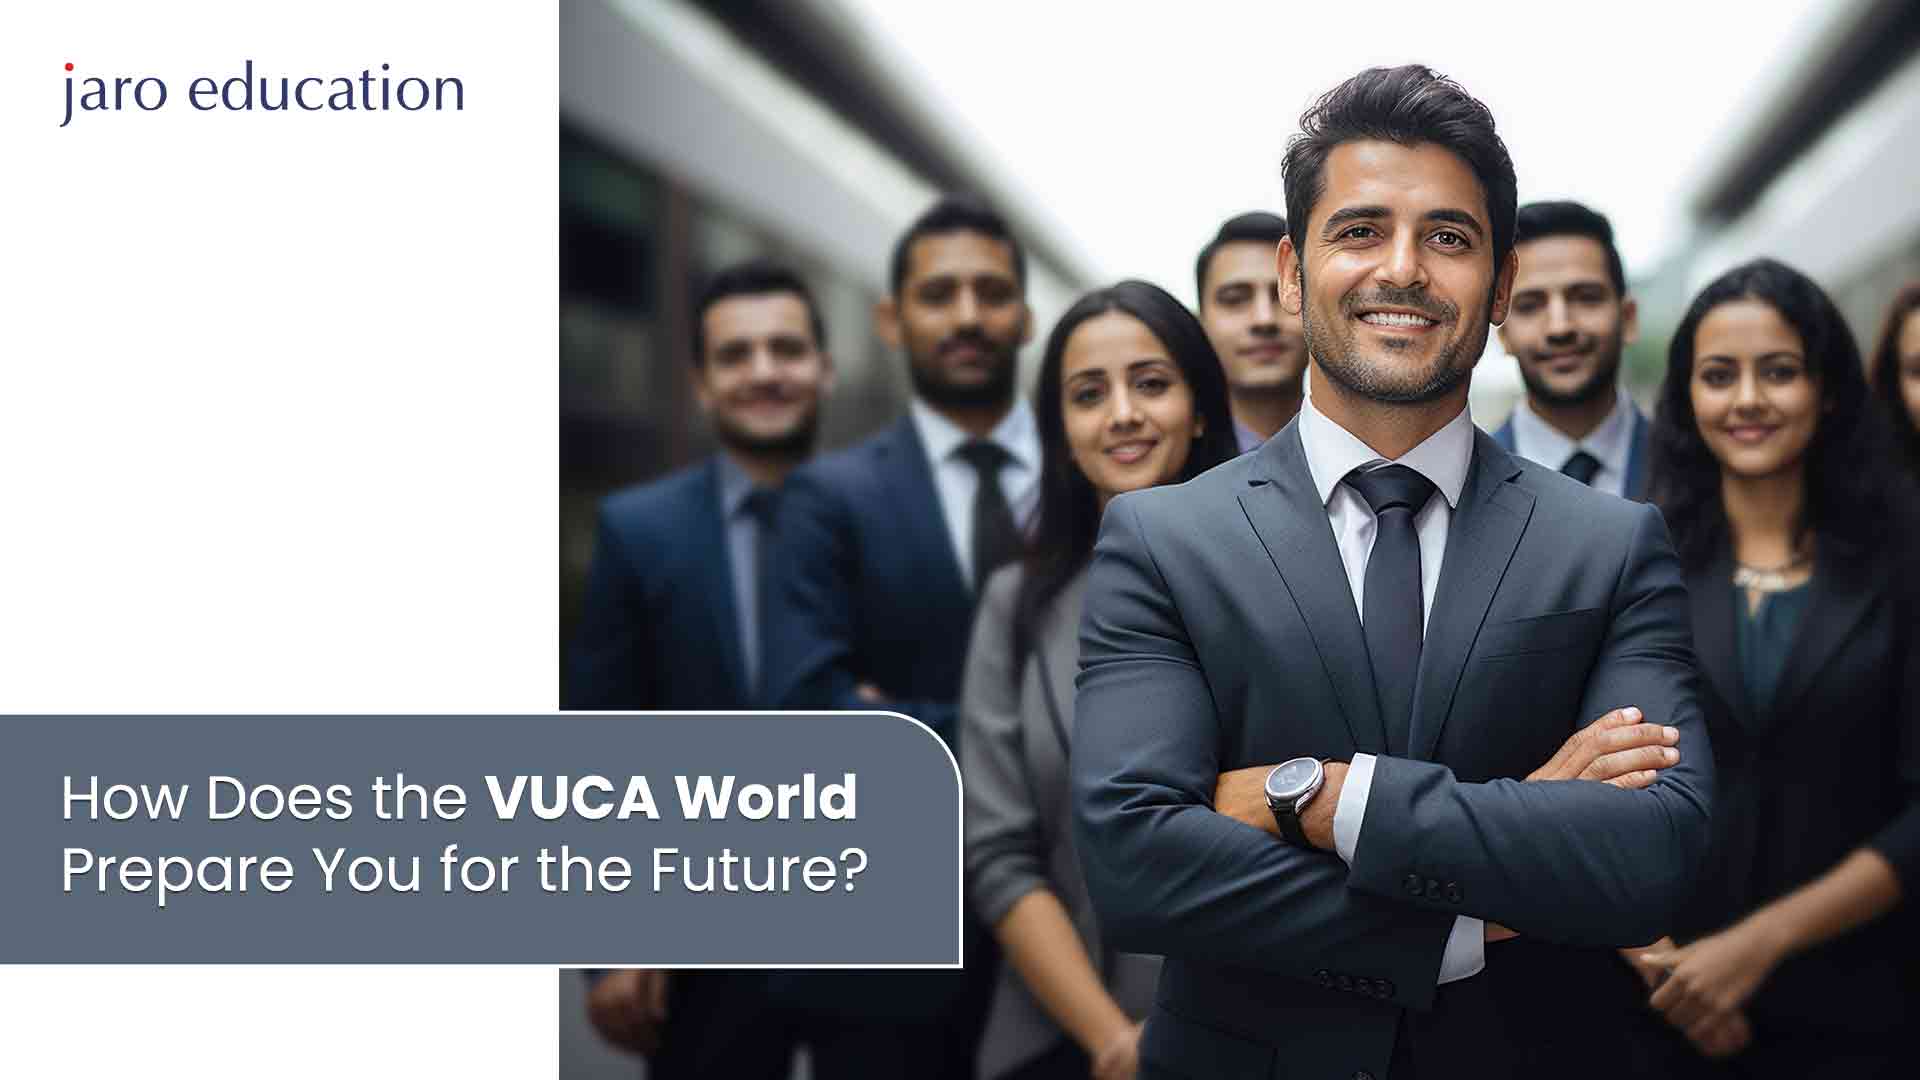 How Does the VUCA World Prepare You for the Future